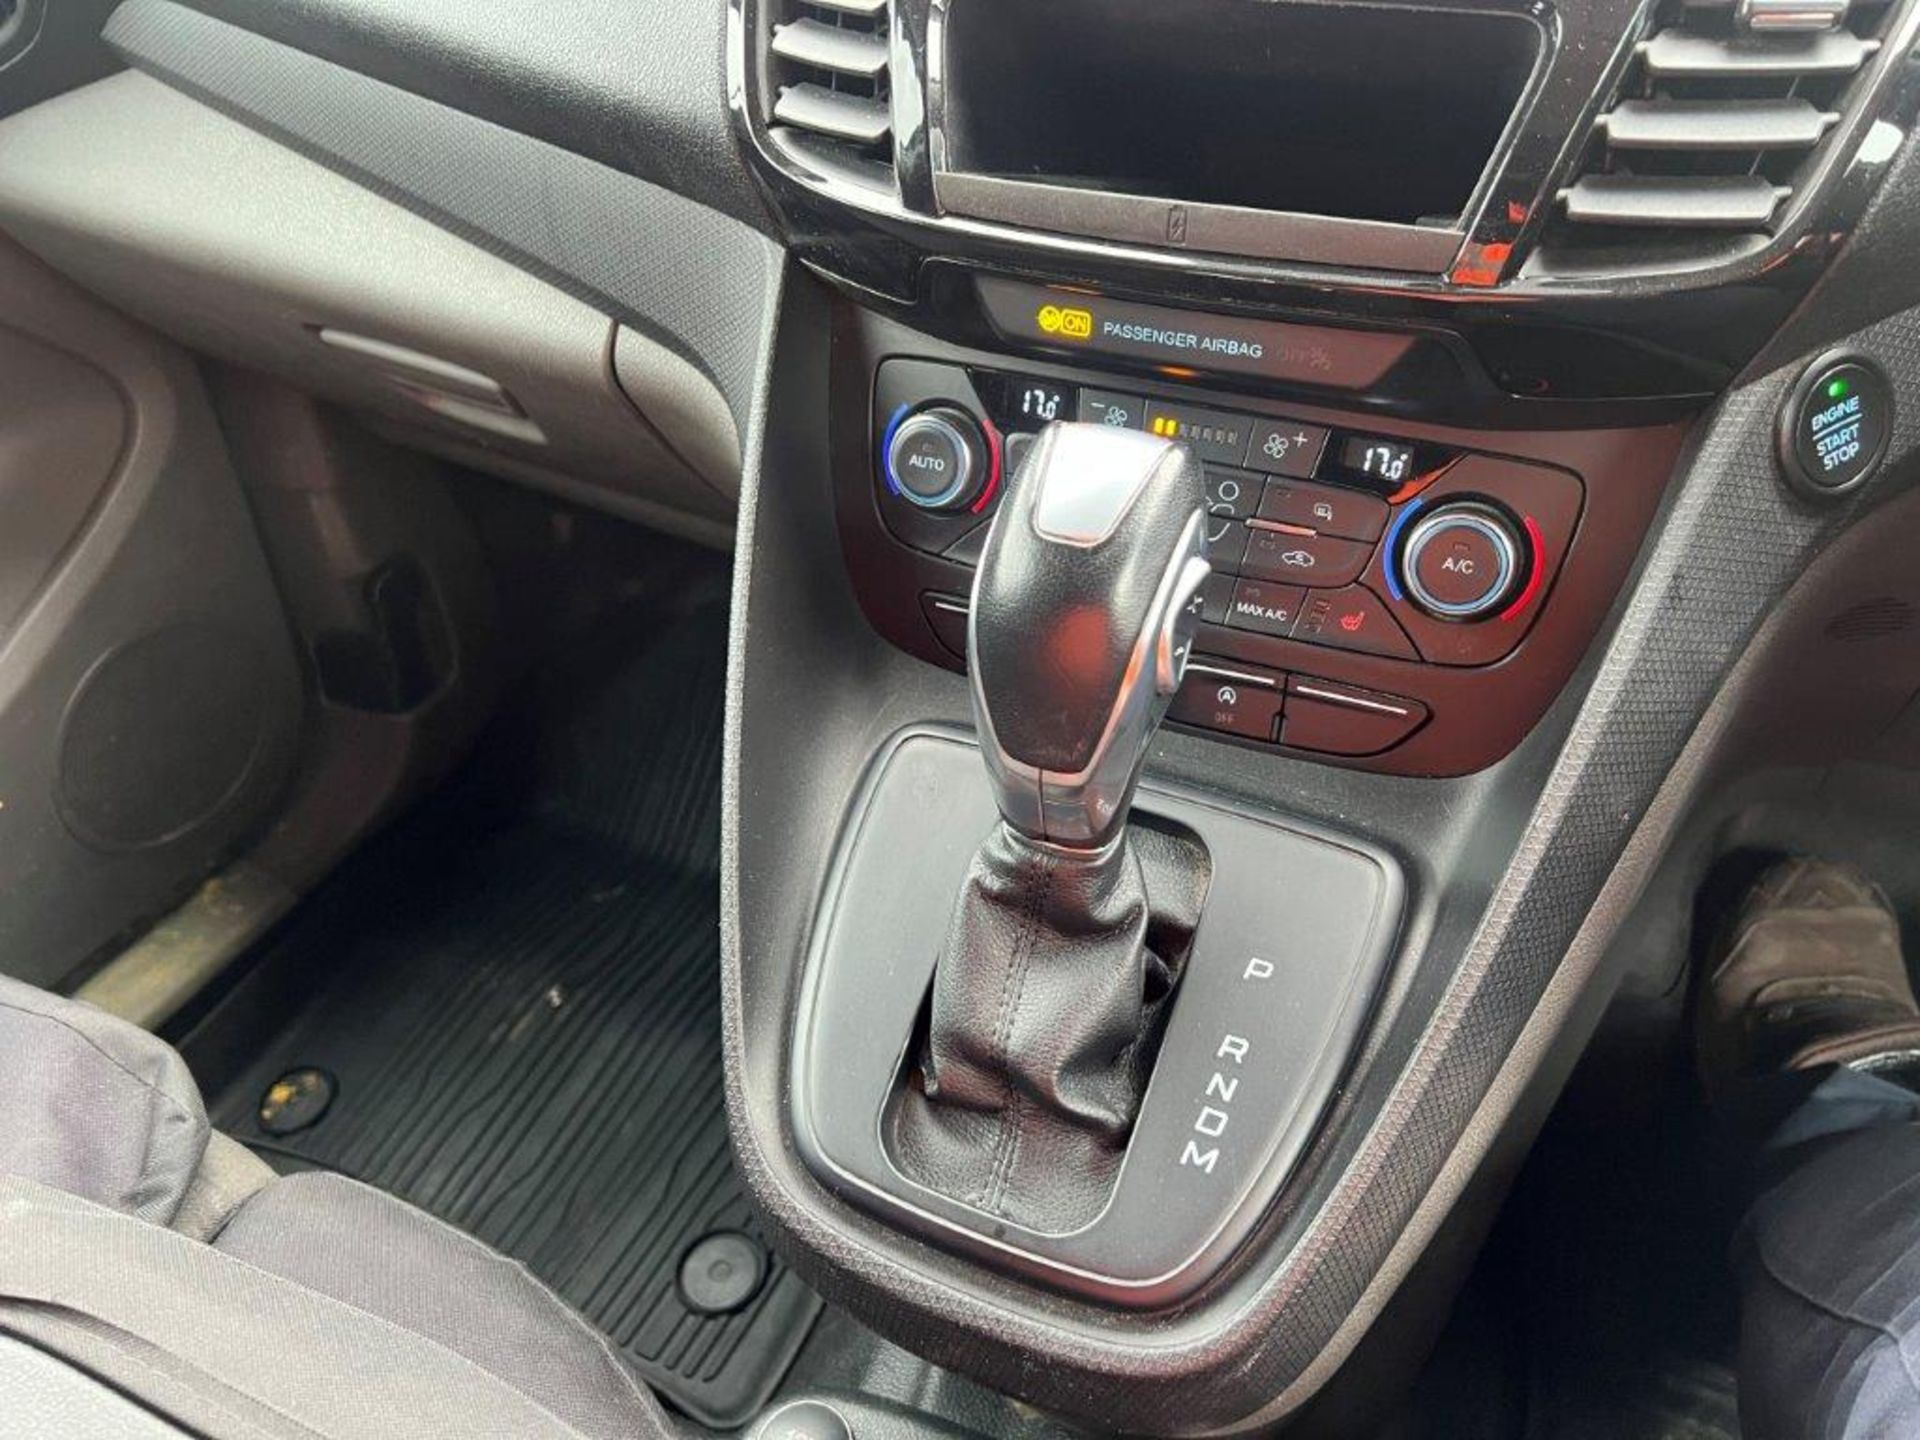 Ford Transit Connect 200 LTD TDCI Auto, Euro 6, 2019, facelift dash/screen - Image 11 of 16